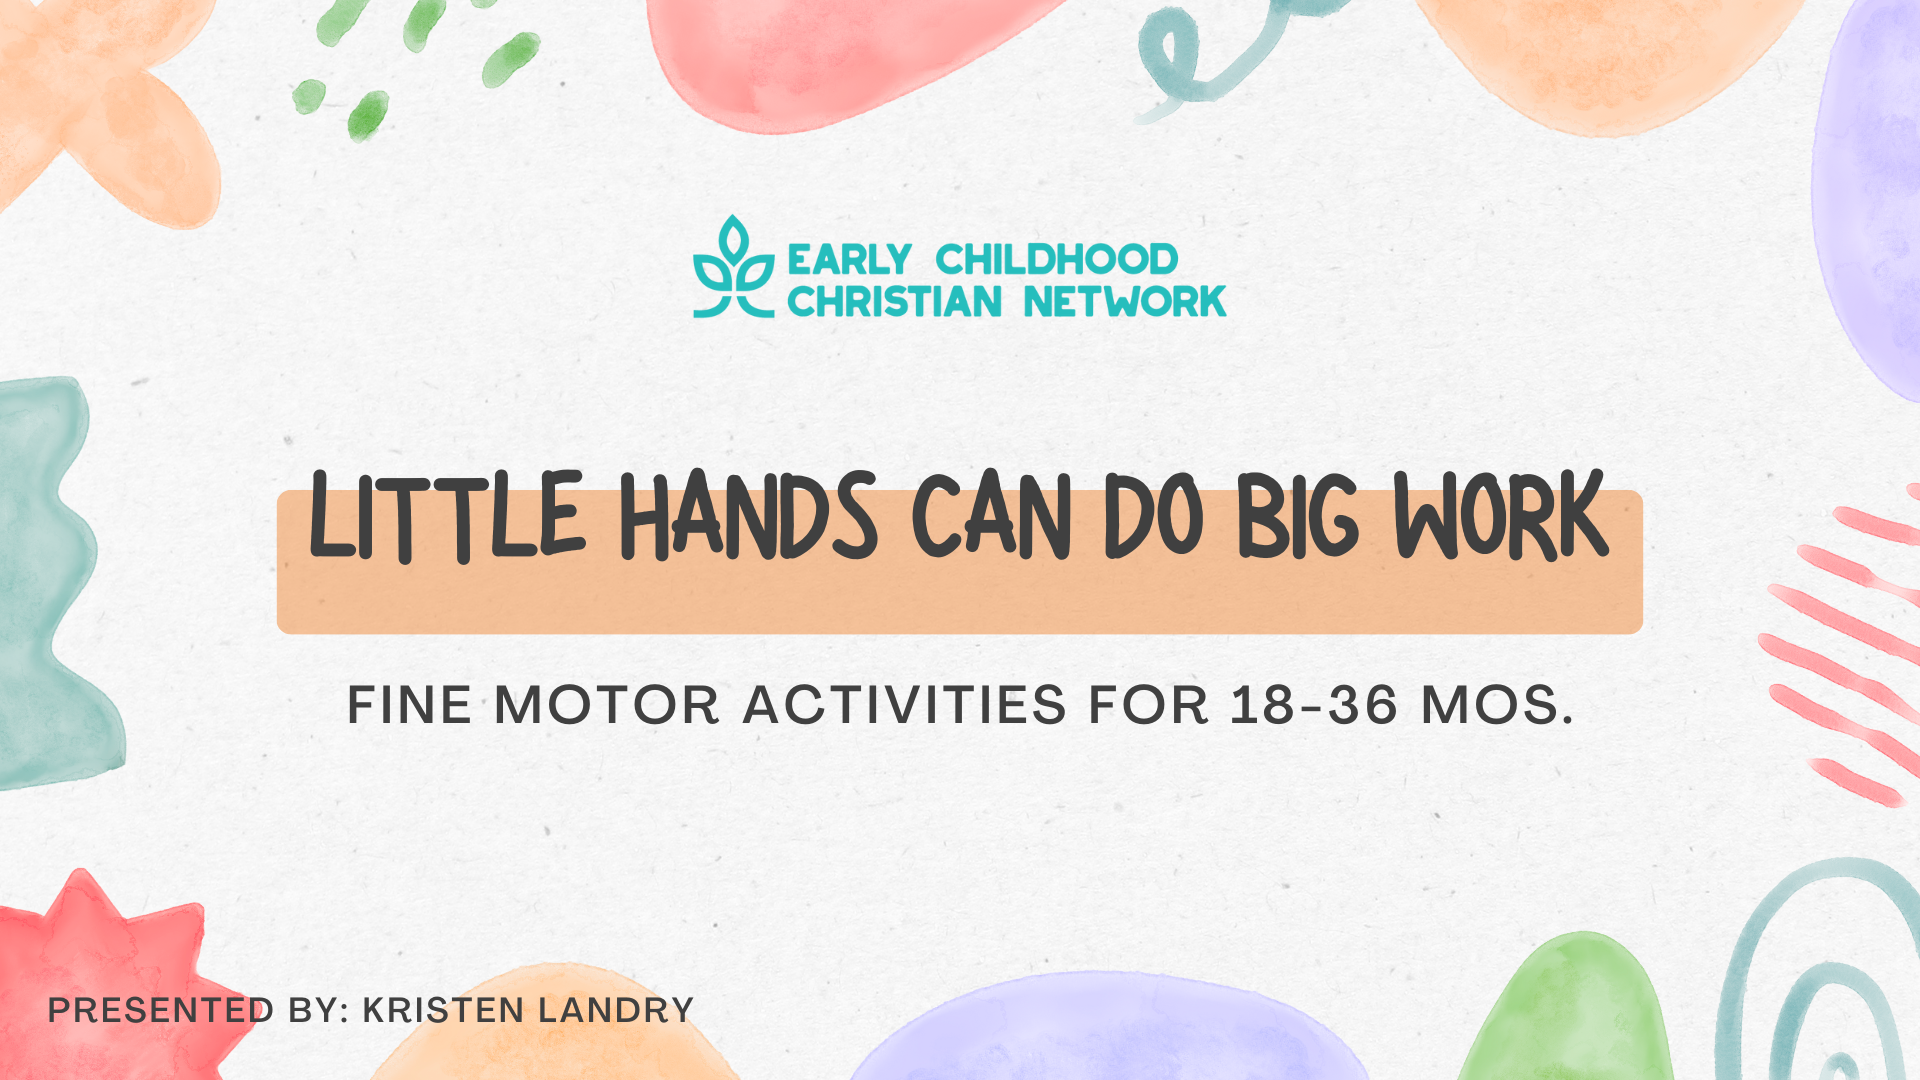 https://earlychildhoodchristiannetwork.com/wp-content/uploads/2021/09/Little-hands-can-do-big-work.png